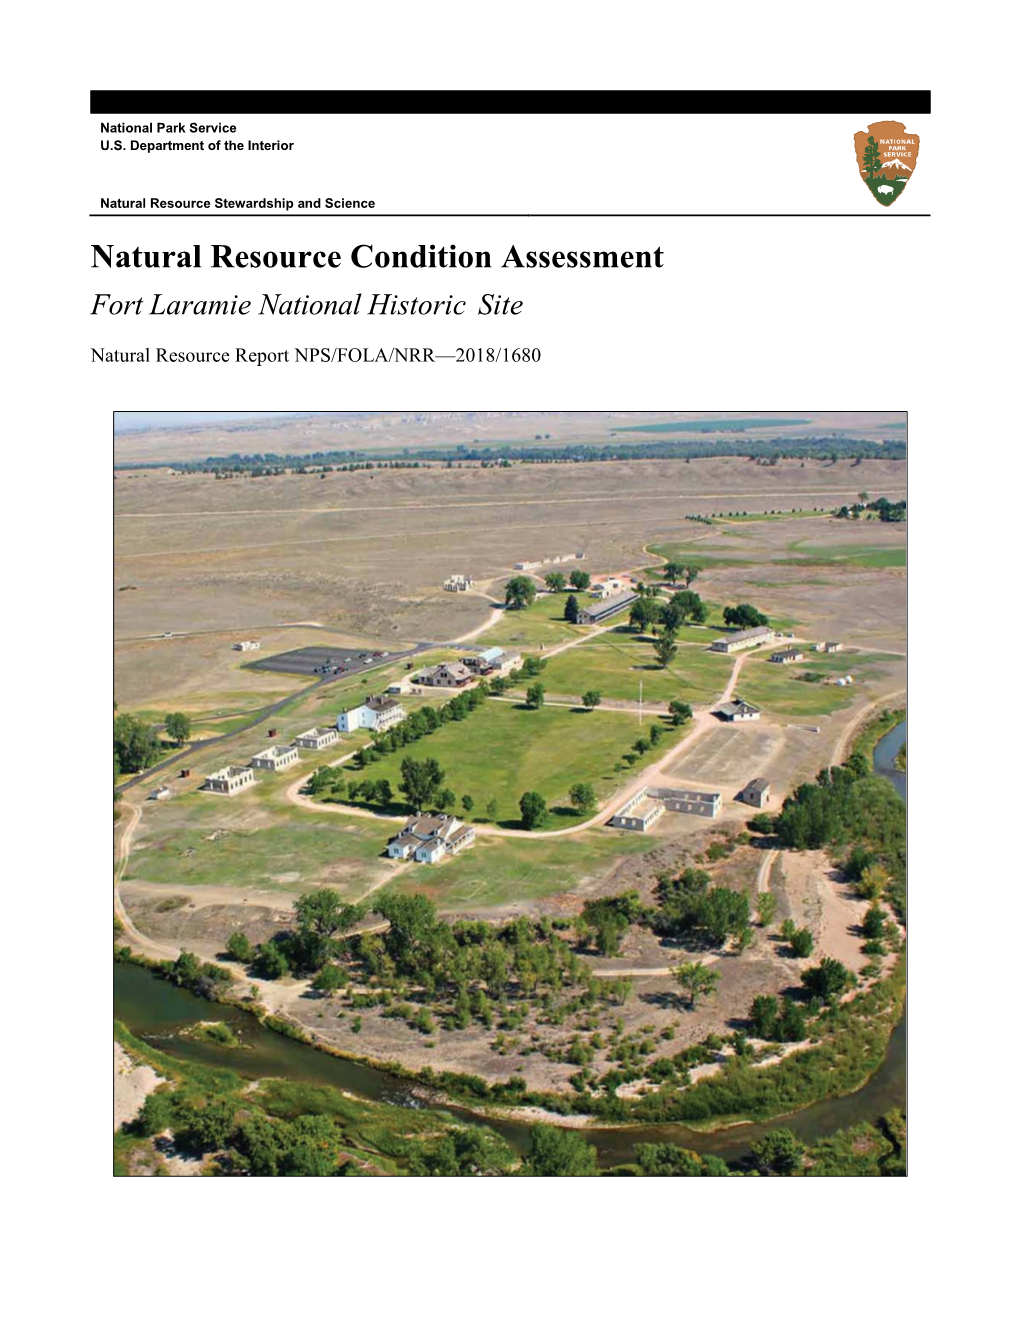 Natural Resource Condition Assessment: Fort Laramie National Historic Site